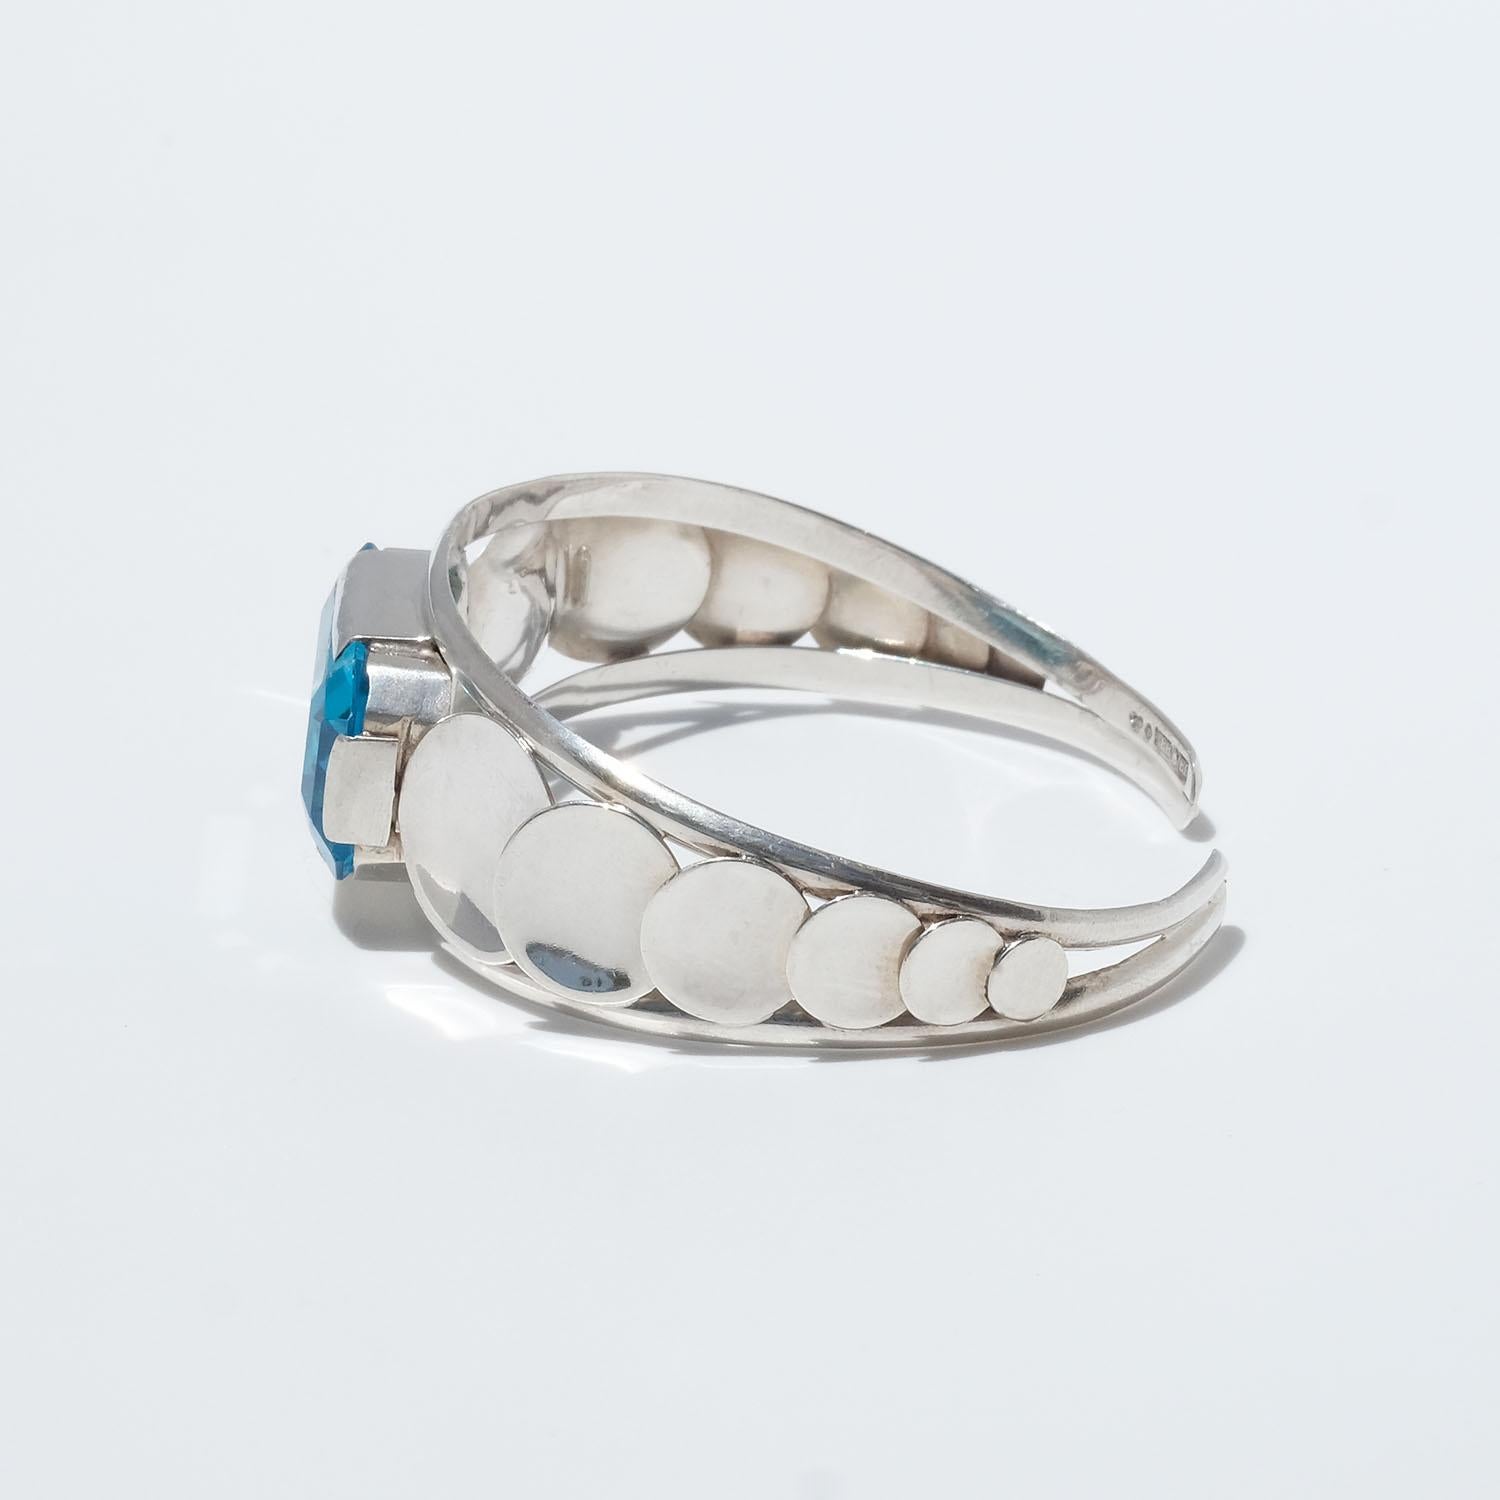 Women's Vintage Silver and Turquoise Stone Cuff Bracelet Made 1955 For Sale